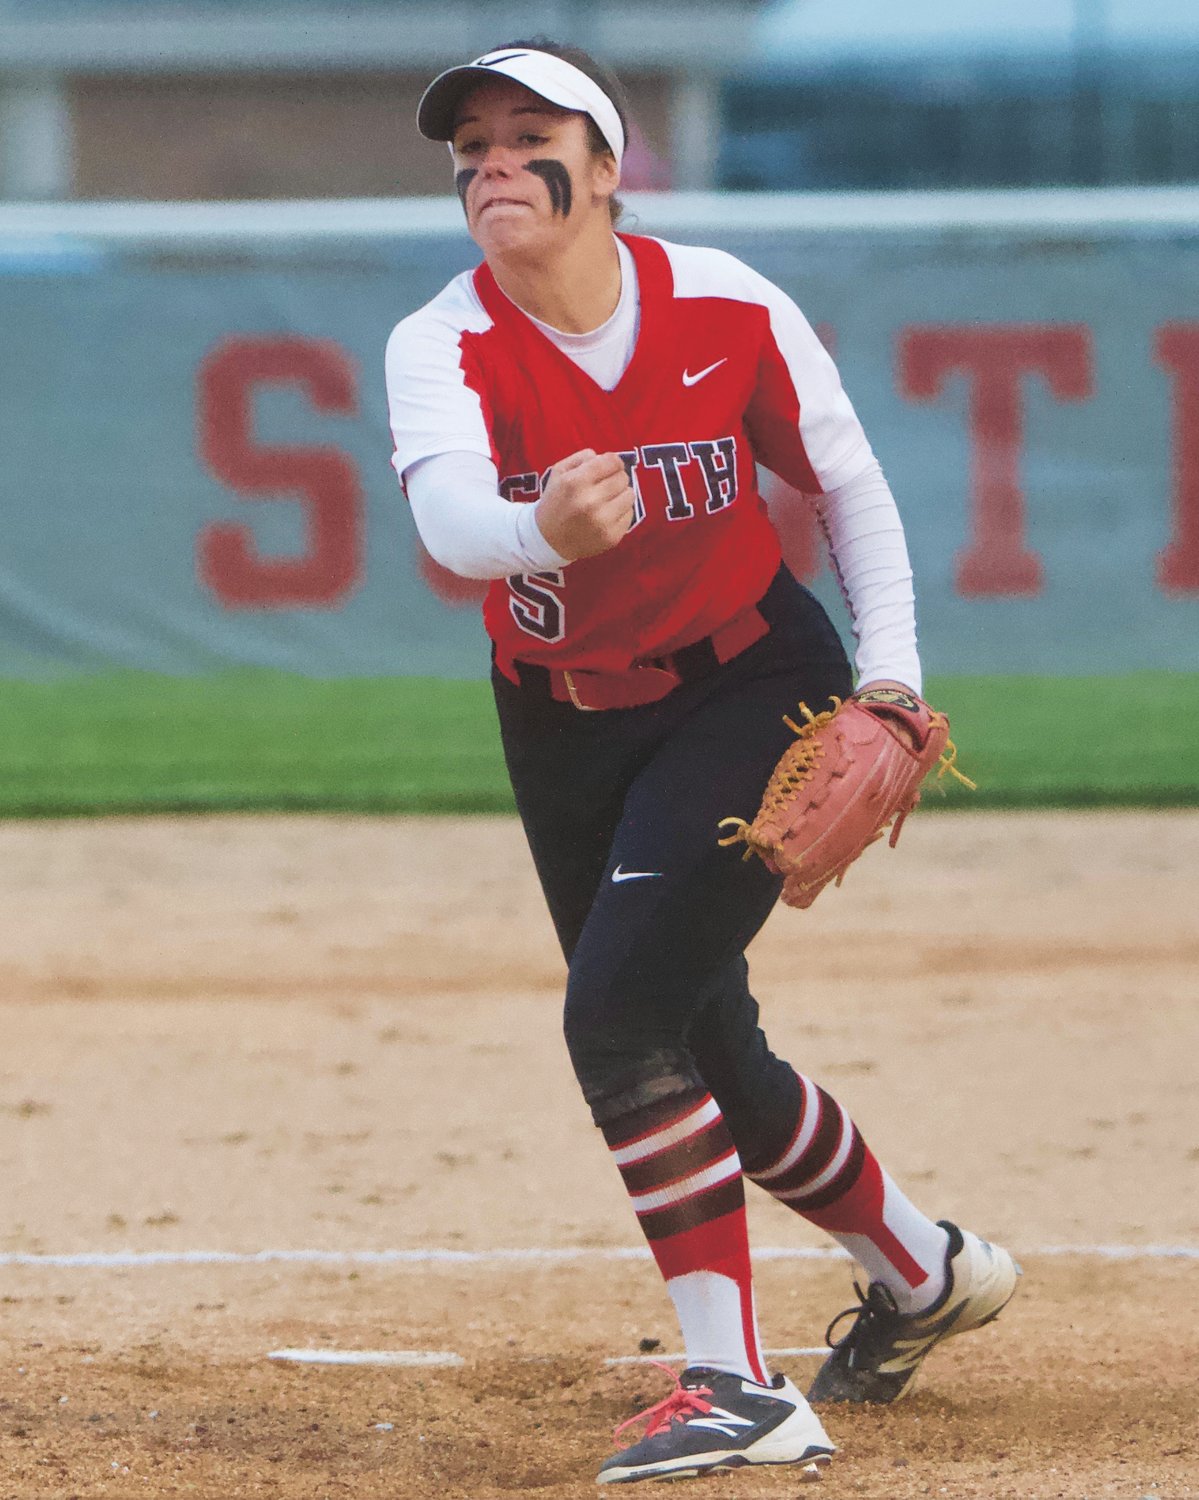 Southmont grad Paige Knowling was in her freshman season at Hanover when COVID-19 contributed to the cancellation of the spring sports season.